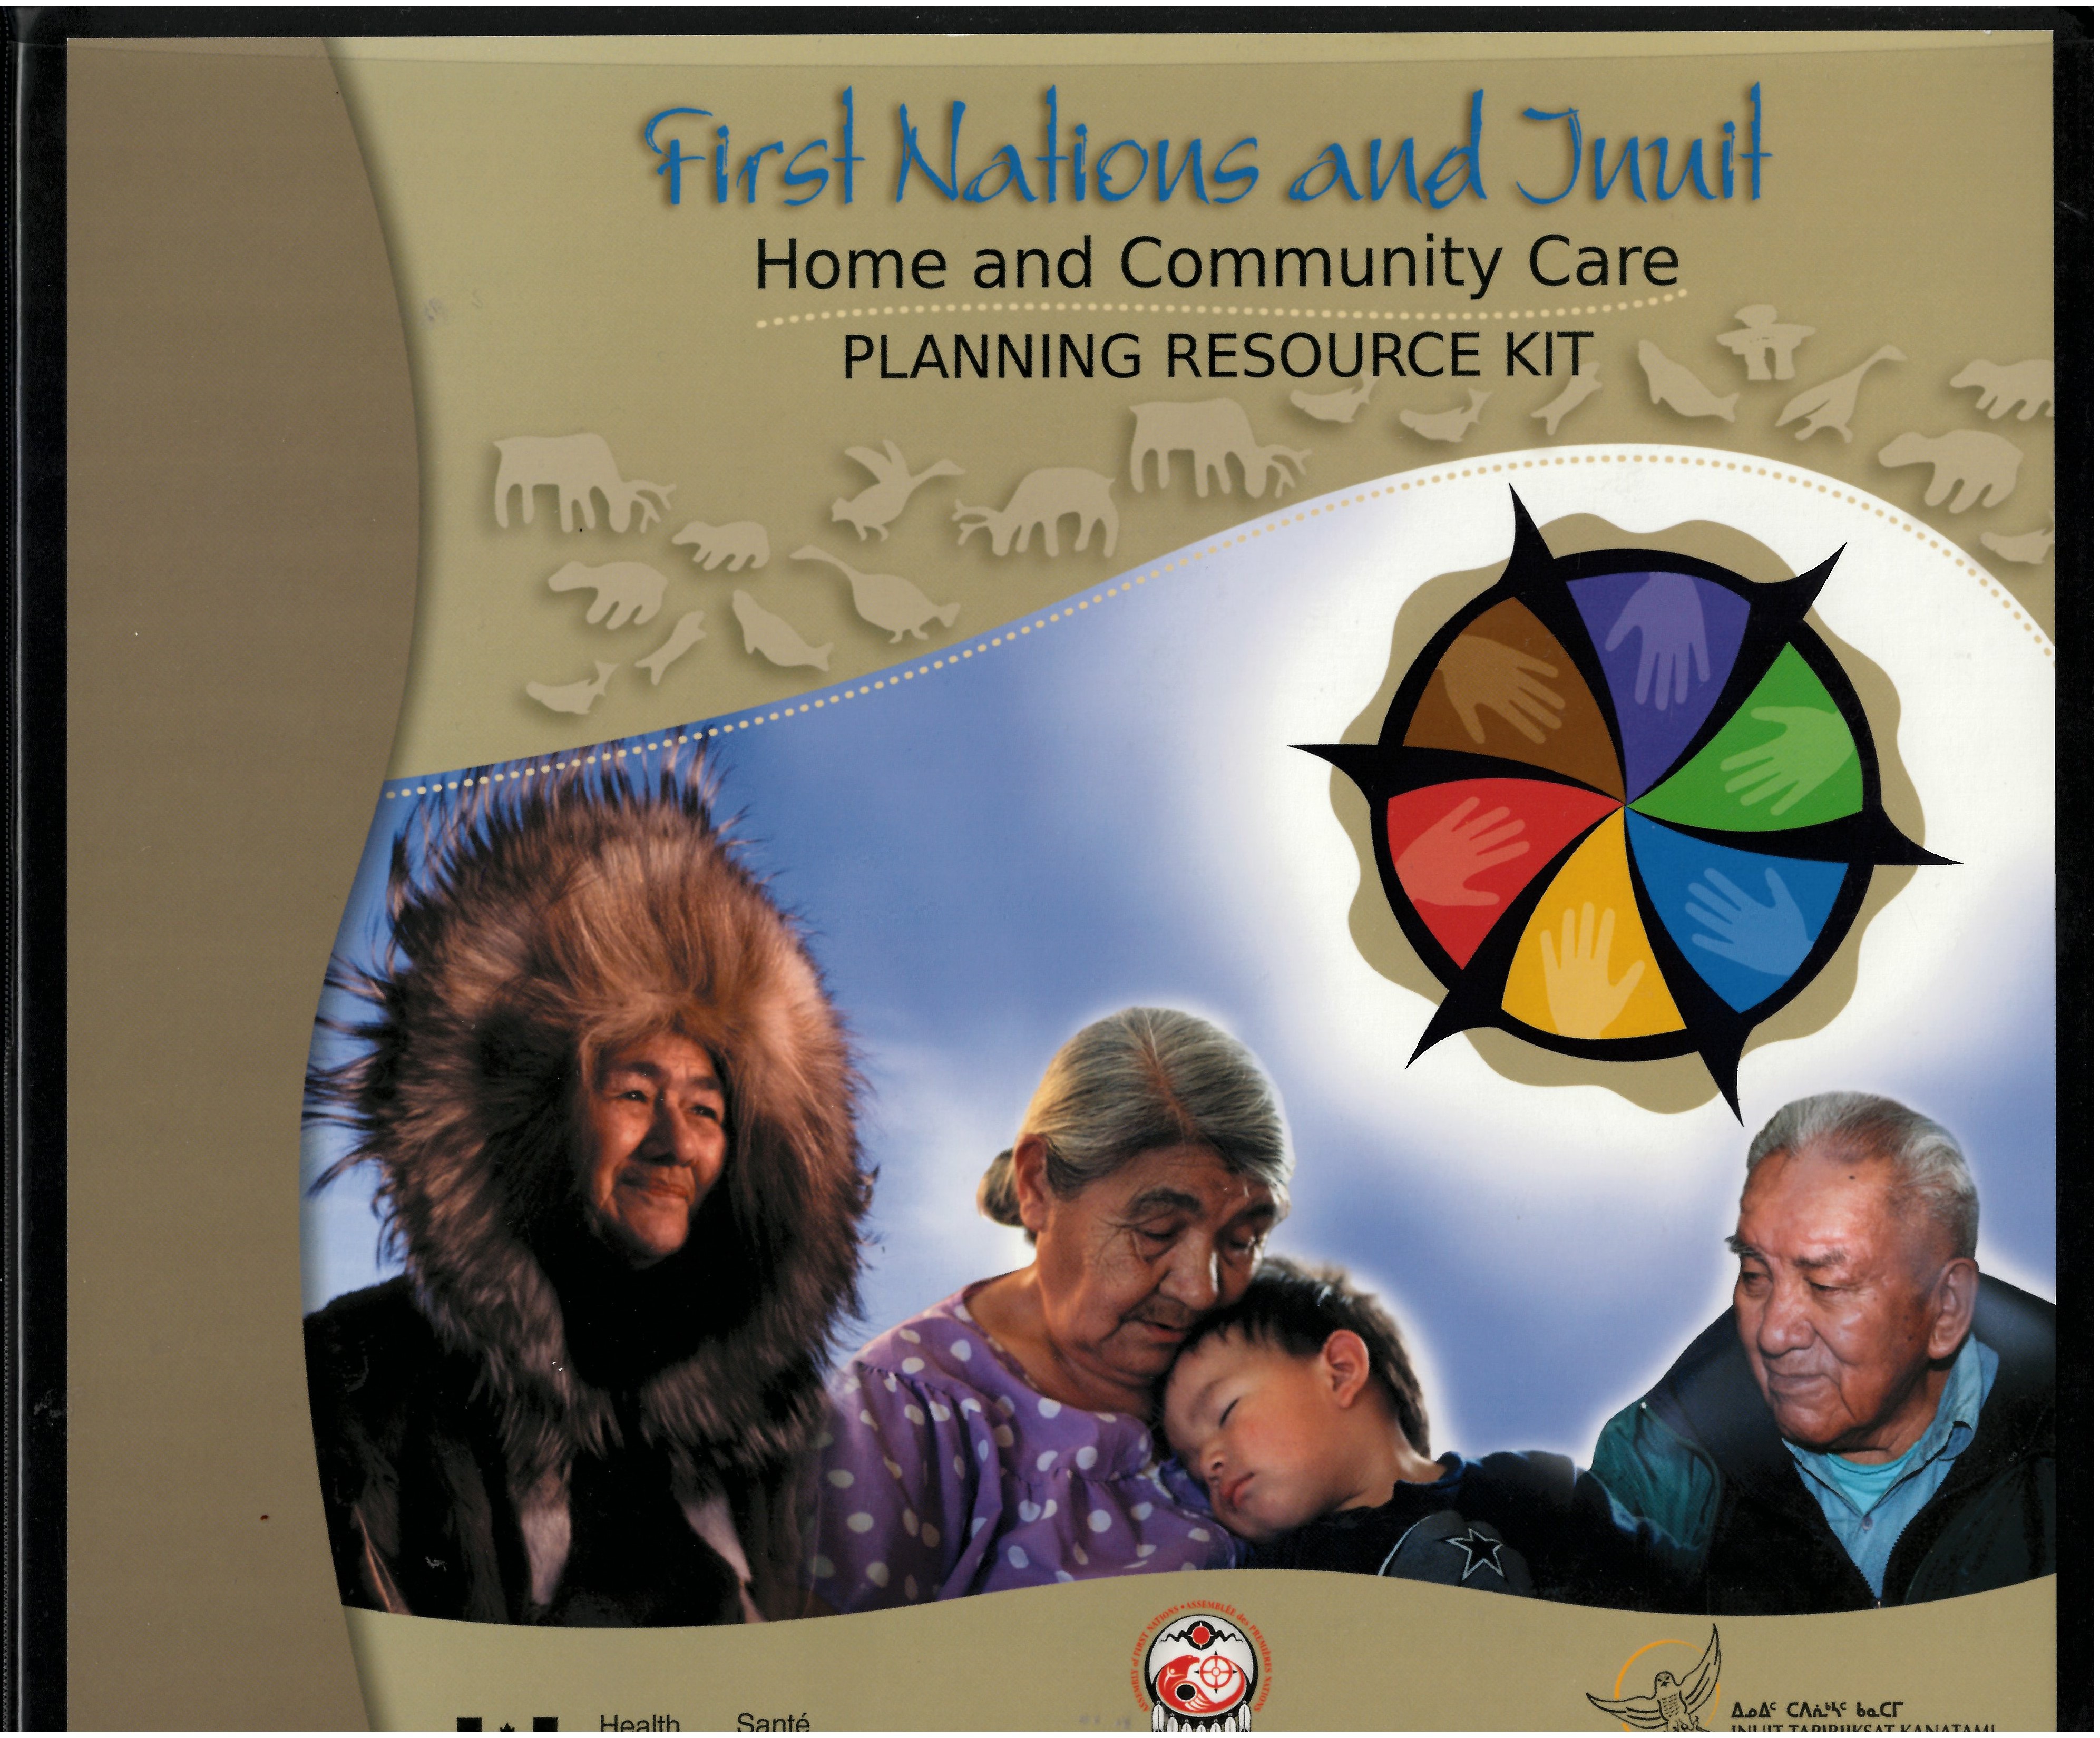 First Nations and Inuit home and community care planning resource kit.